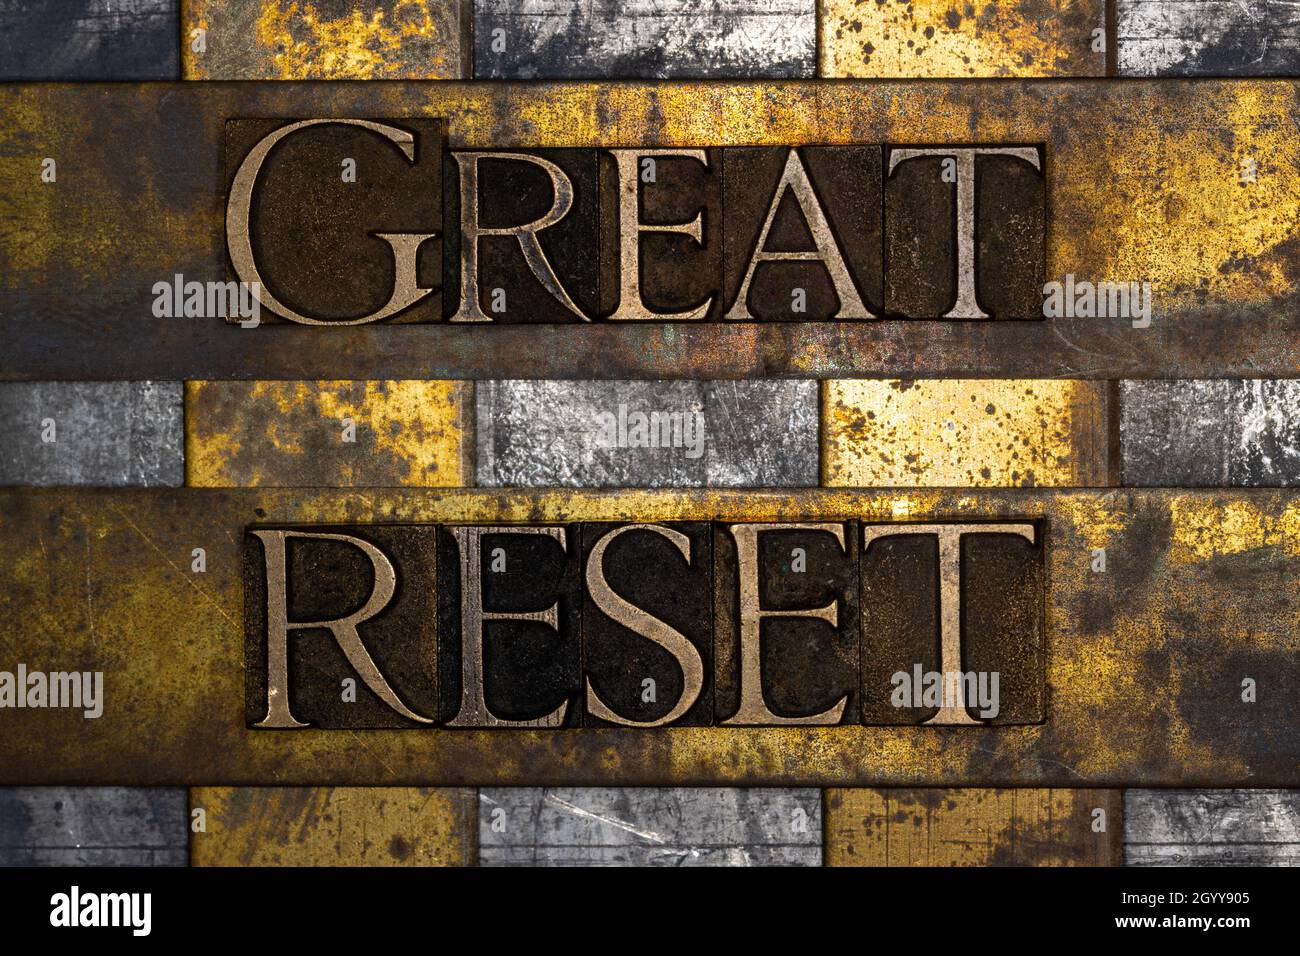 Great Reset text on textured grunge copper and vintage gold background Stock Photo